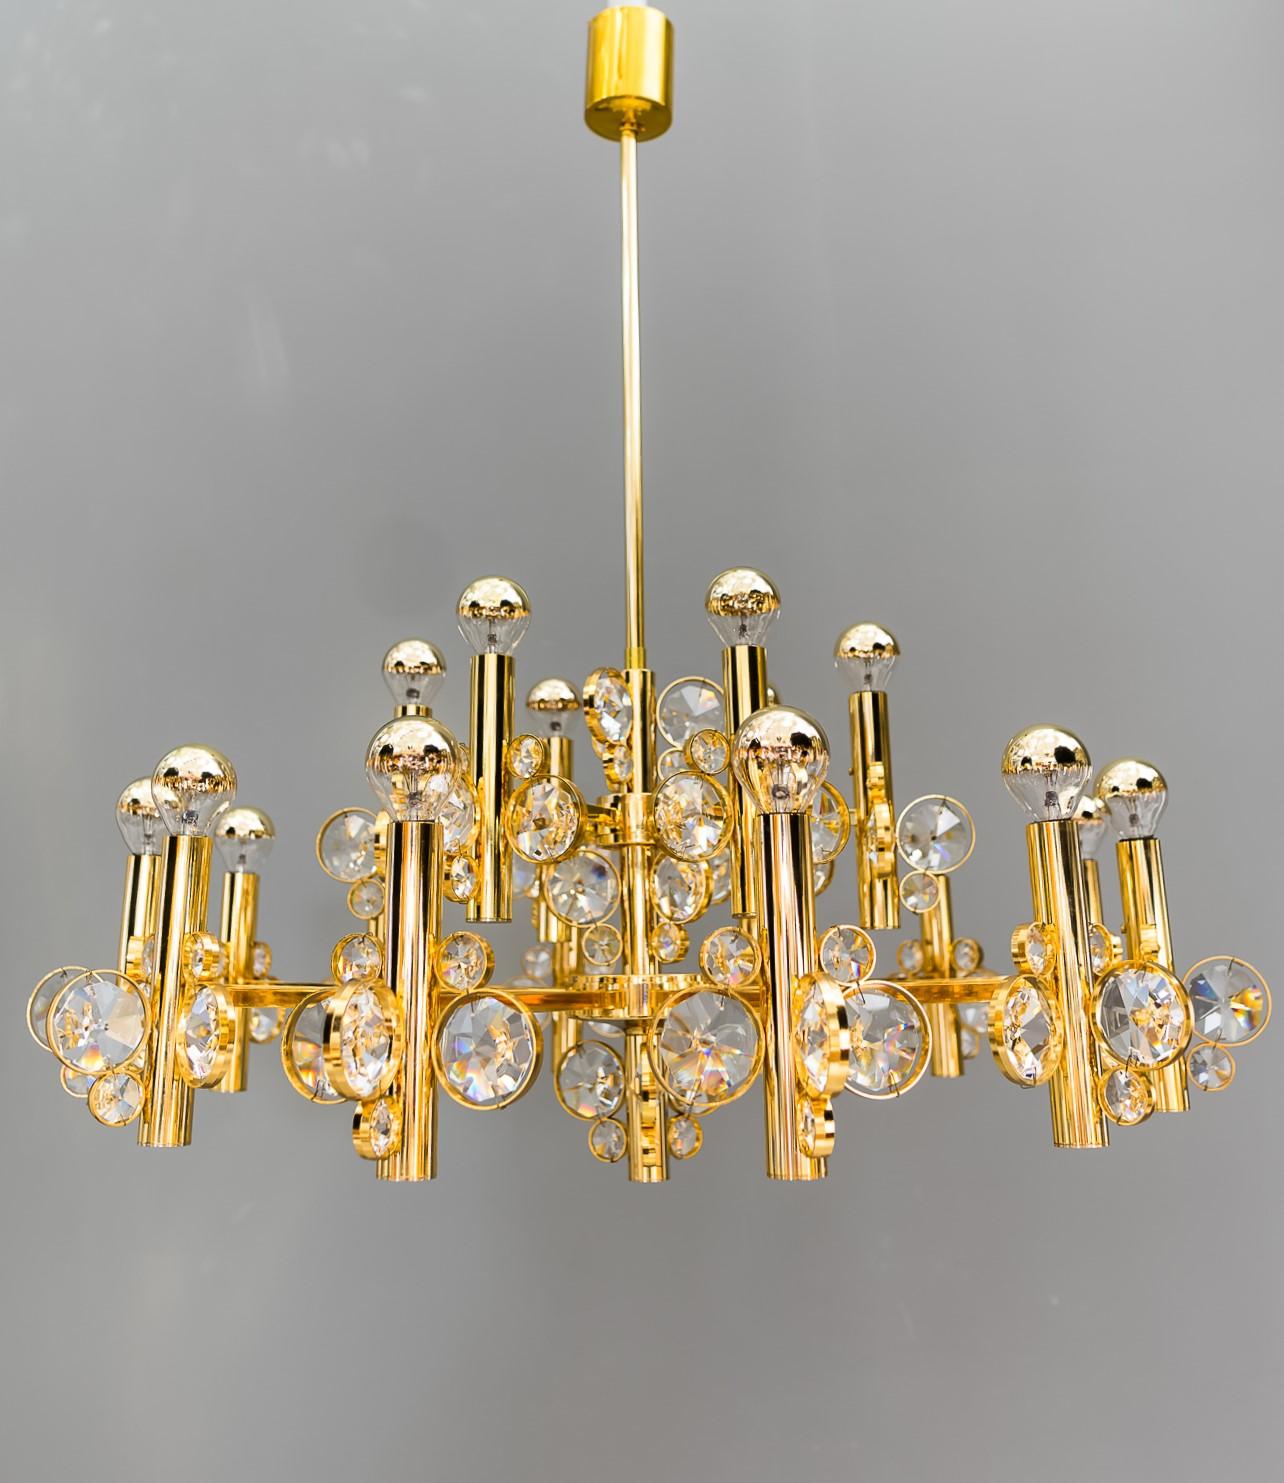 Big chandelier in the style of Palwa, Vienna, 1960s
Original condition.